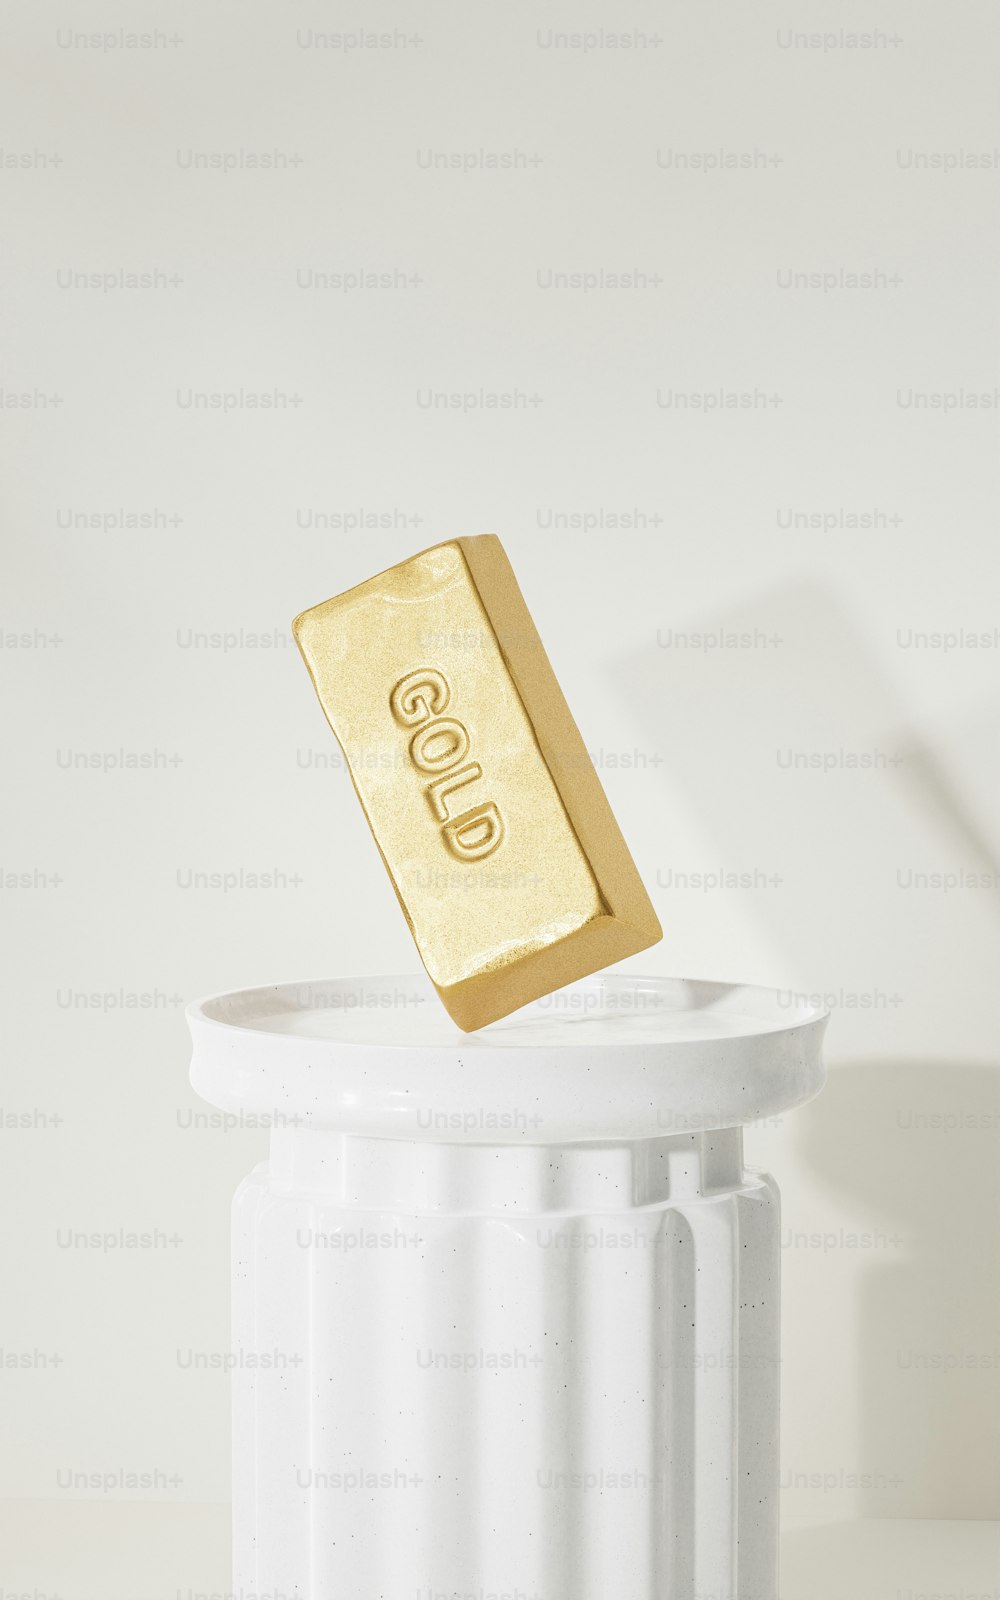 a gold bar sticking out of a white container